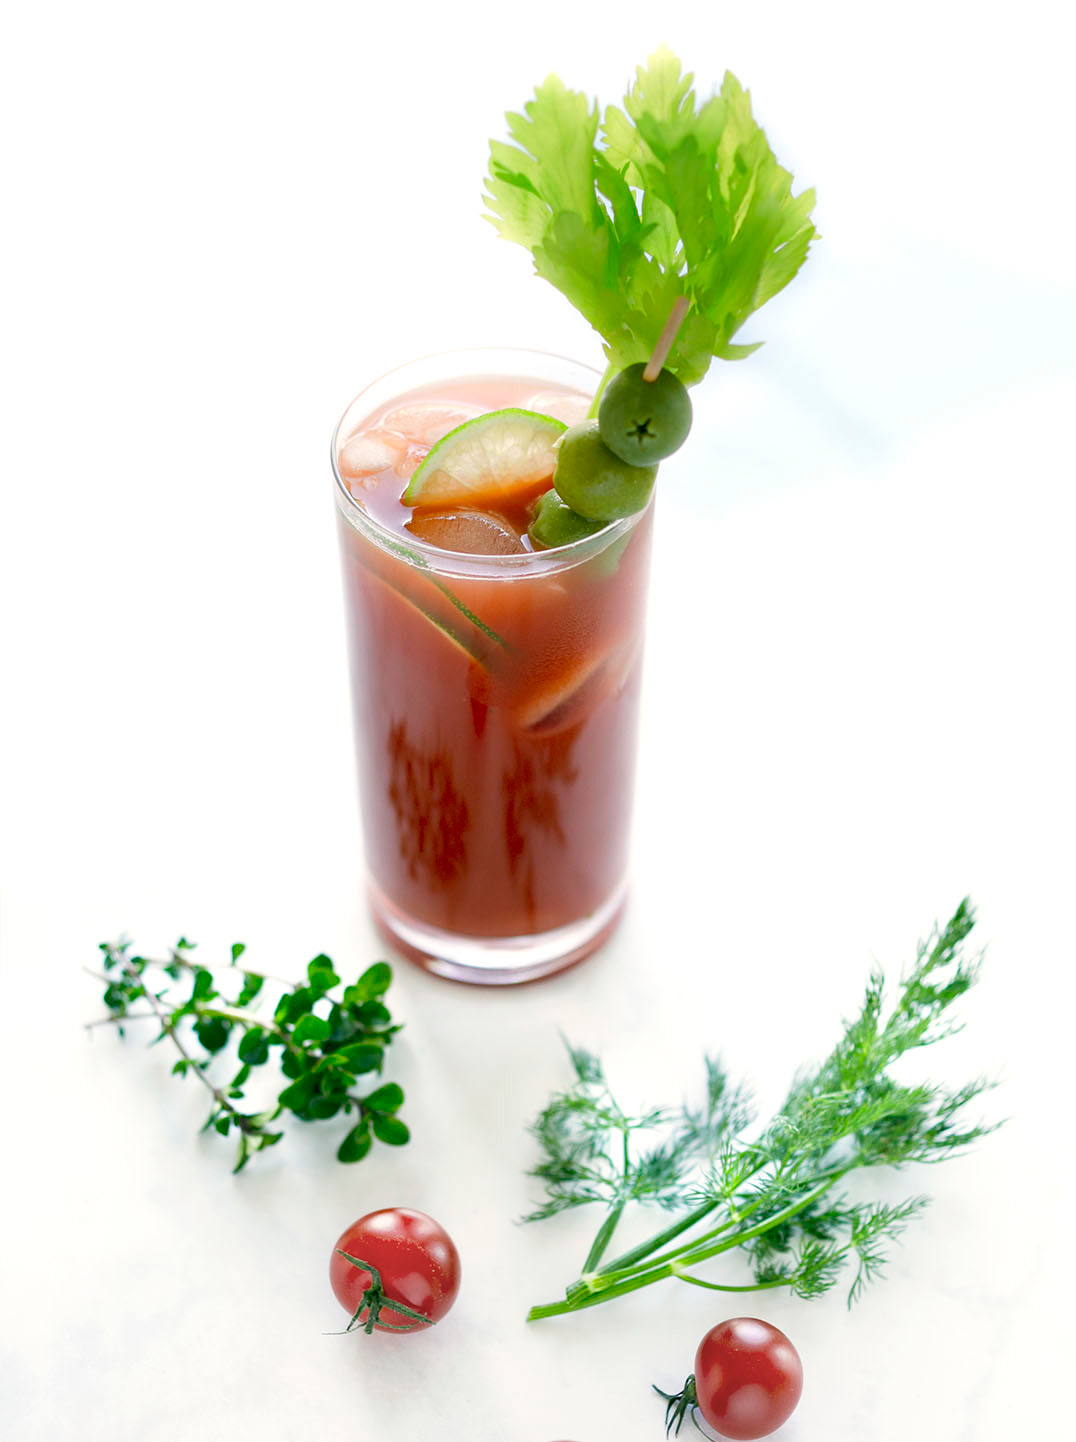 A deep red tomato based juice with ice and garnished with celery lime and a skewer of green olives